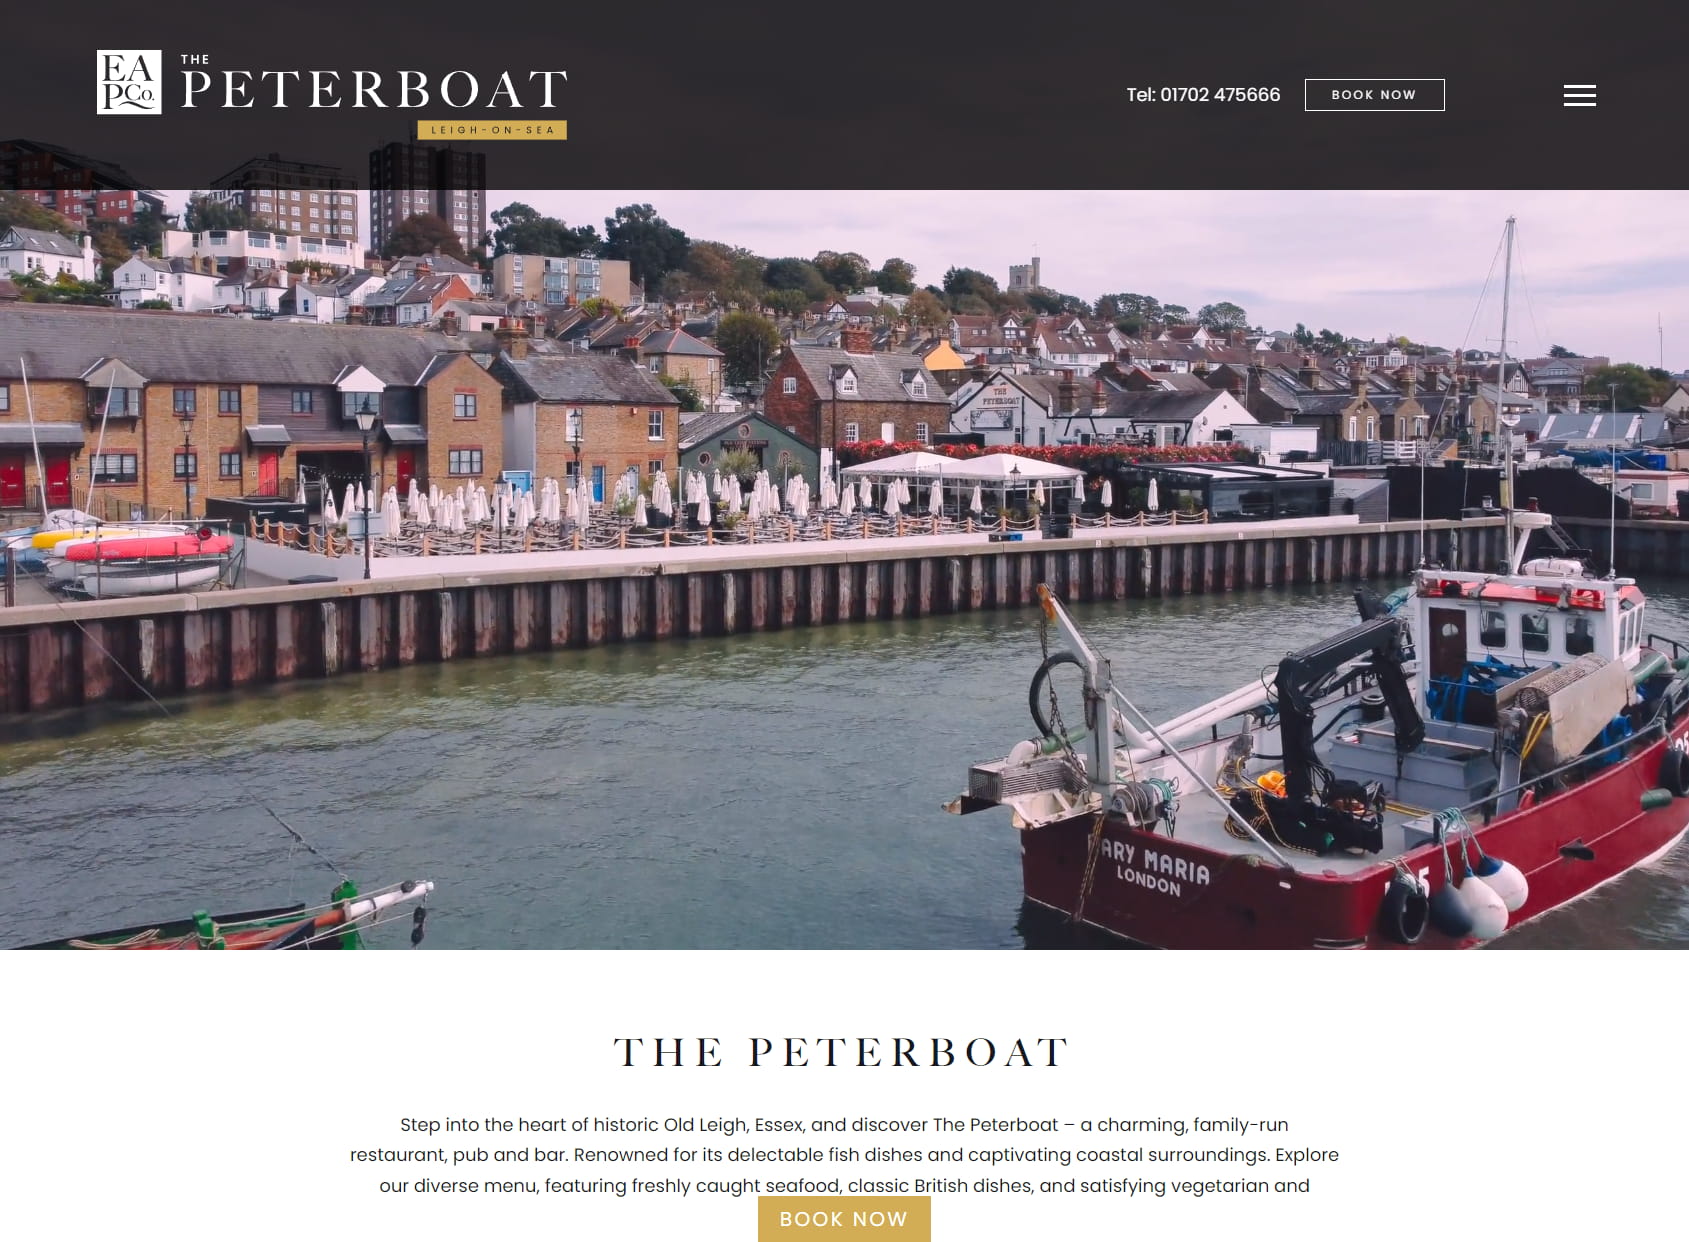 The Peterboat